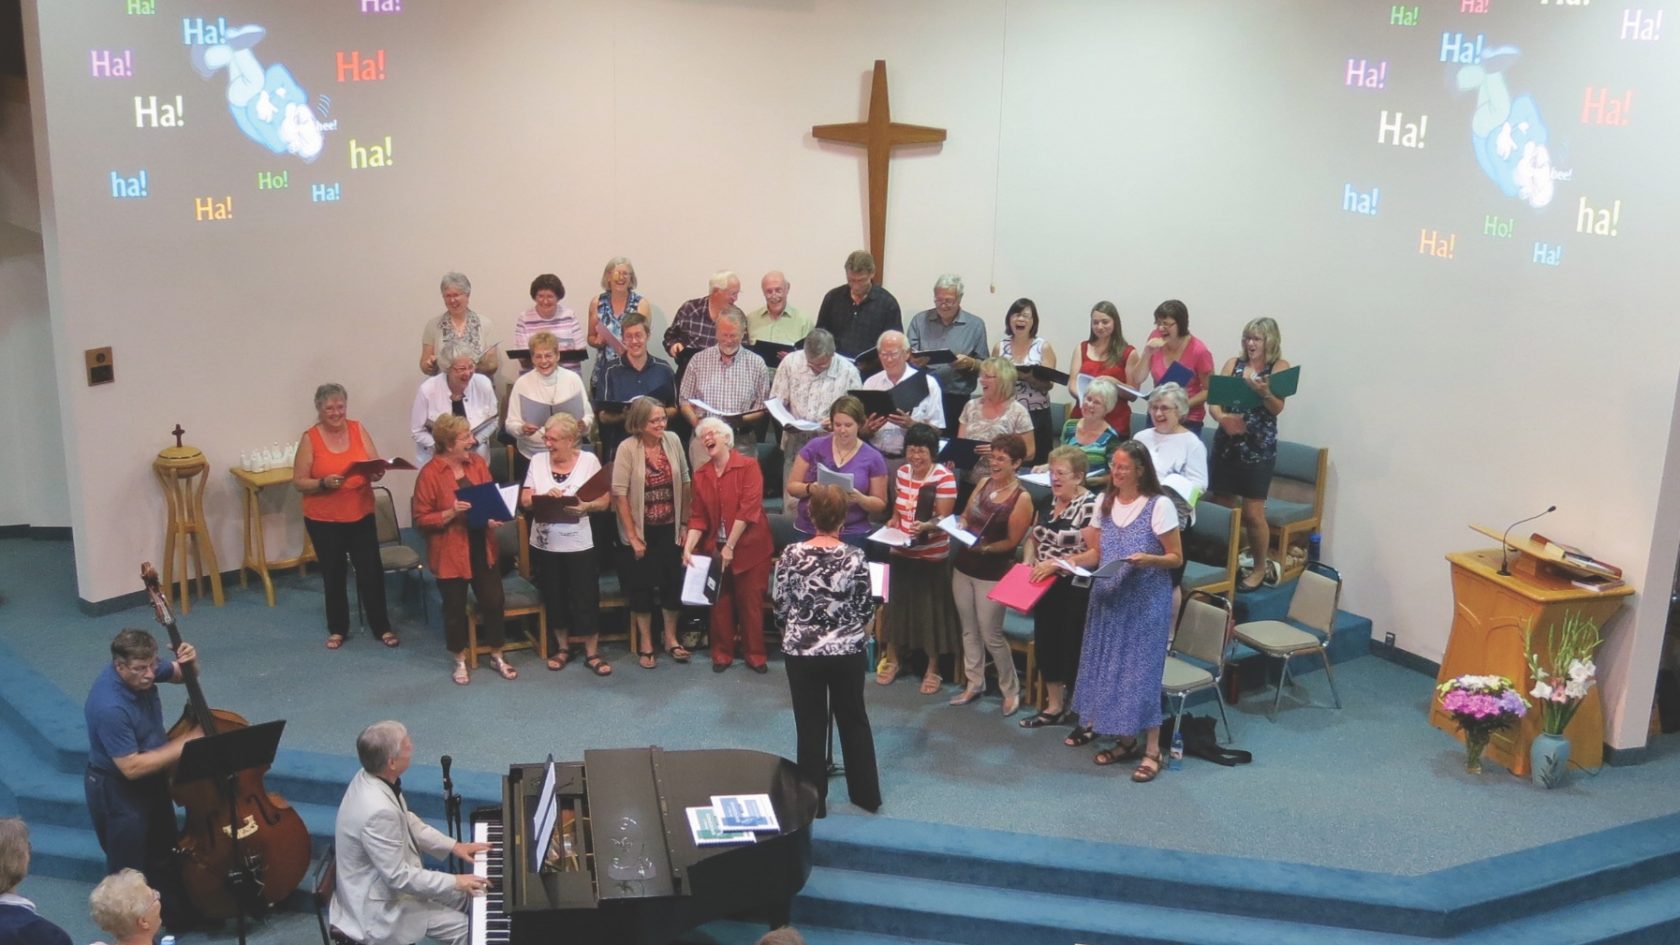 Congregation at service, with piano